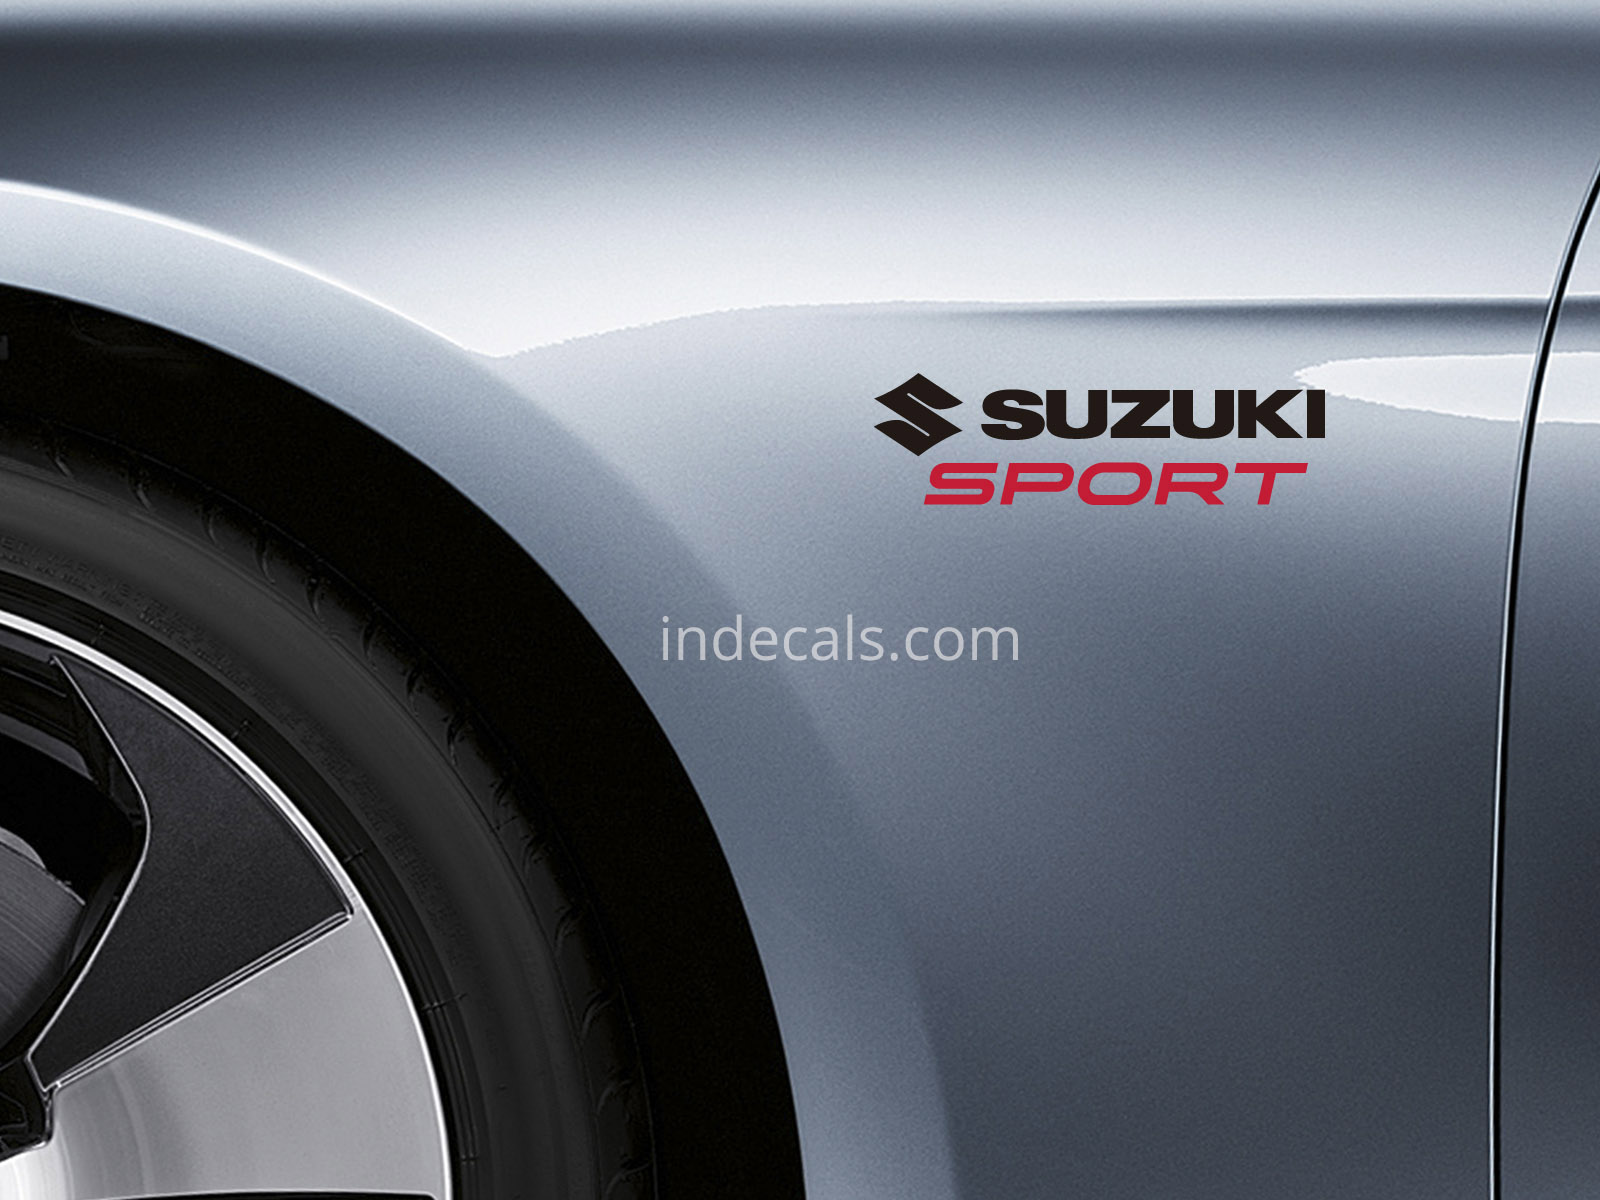 2 x Suzuki Sports stickers for Wings - Black & Red